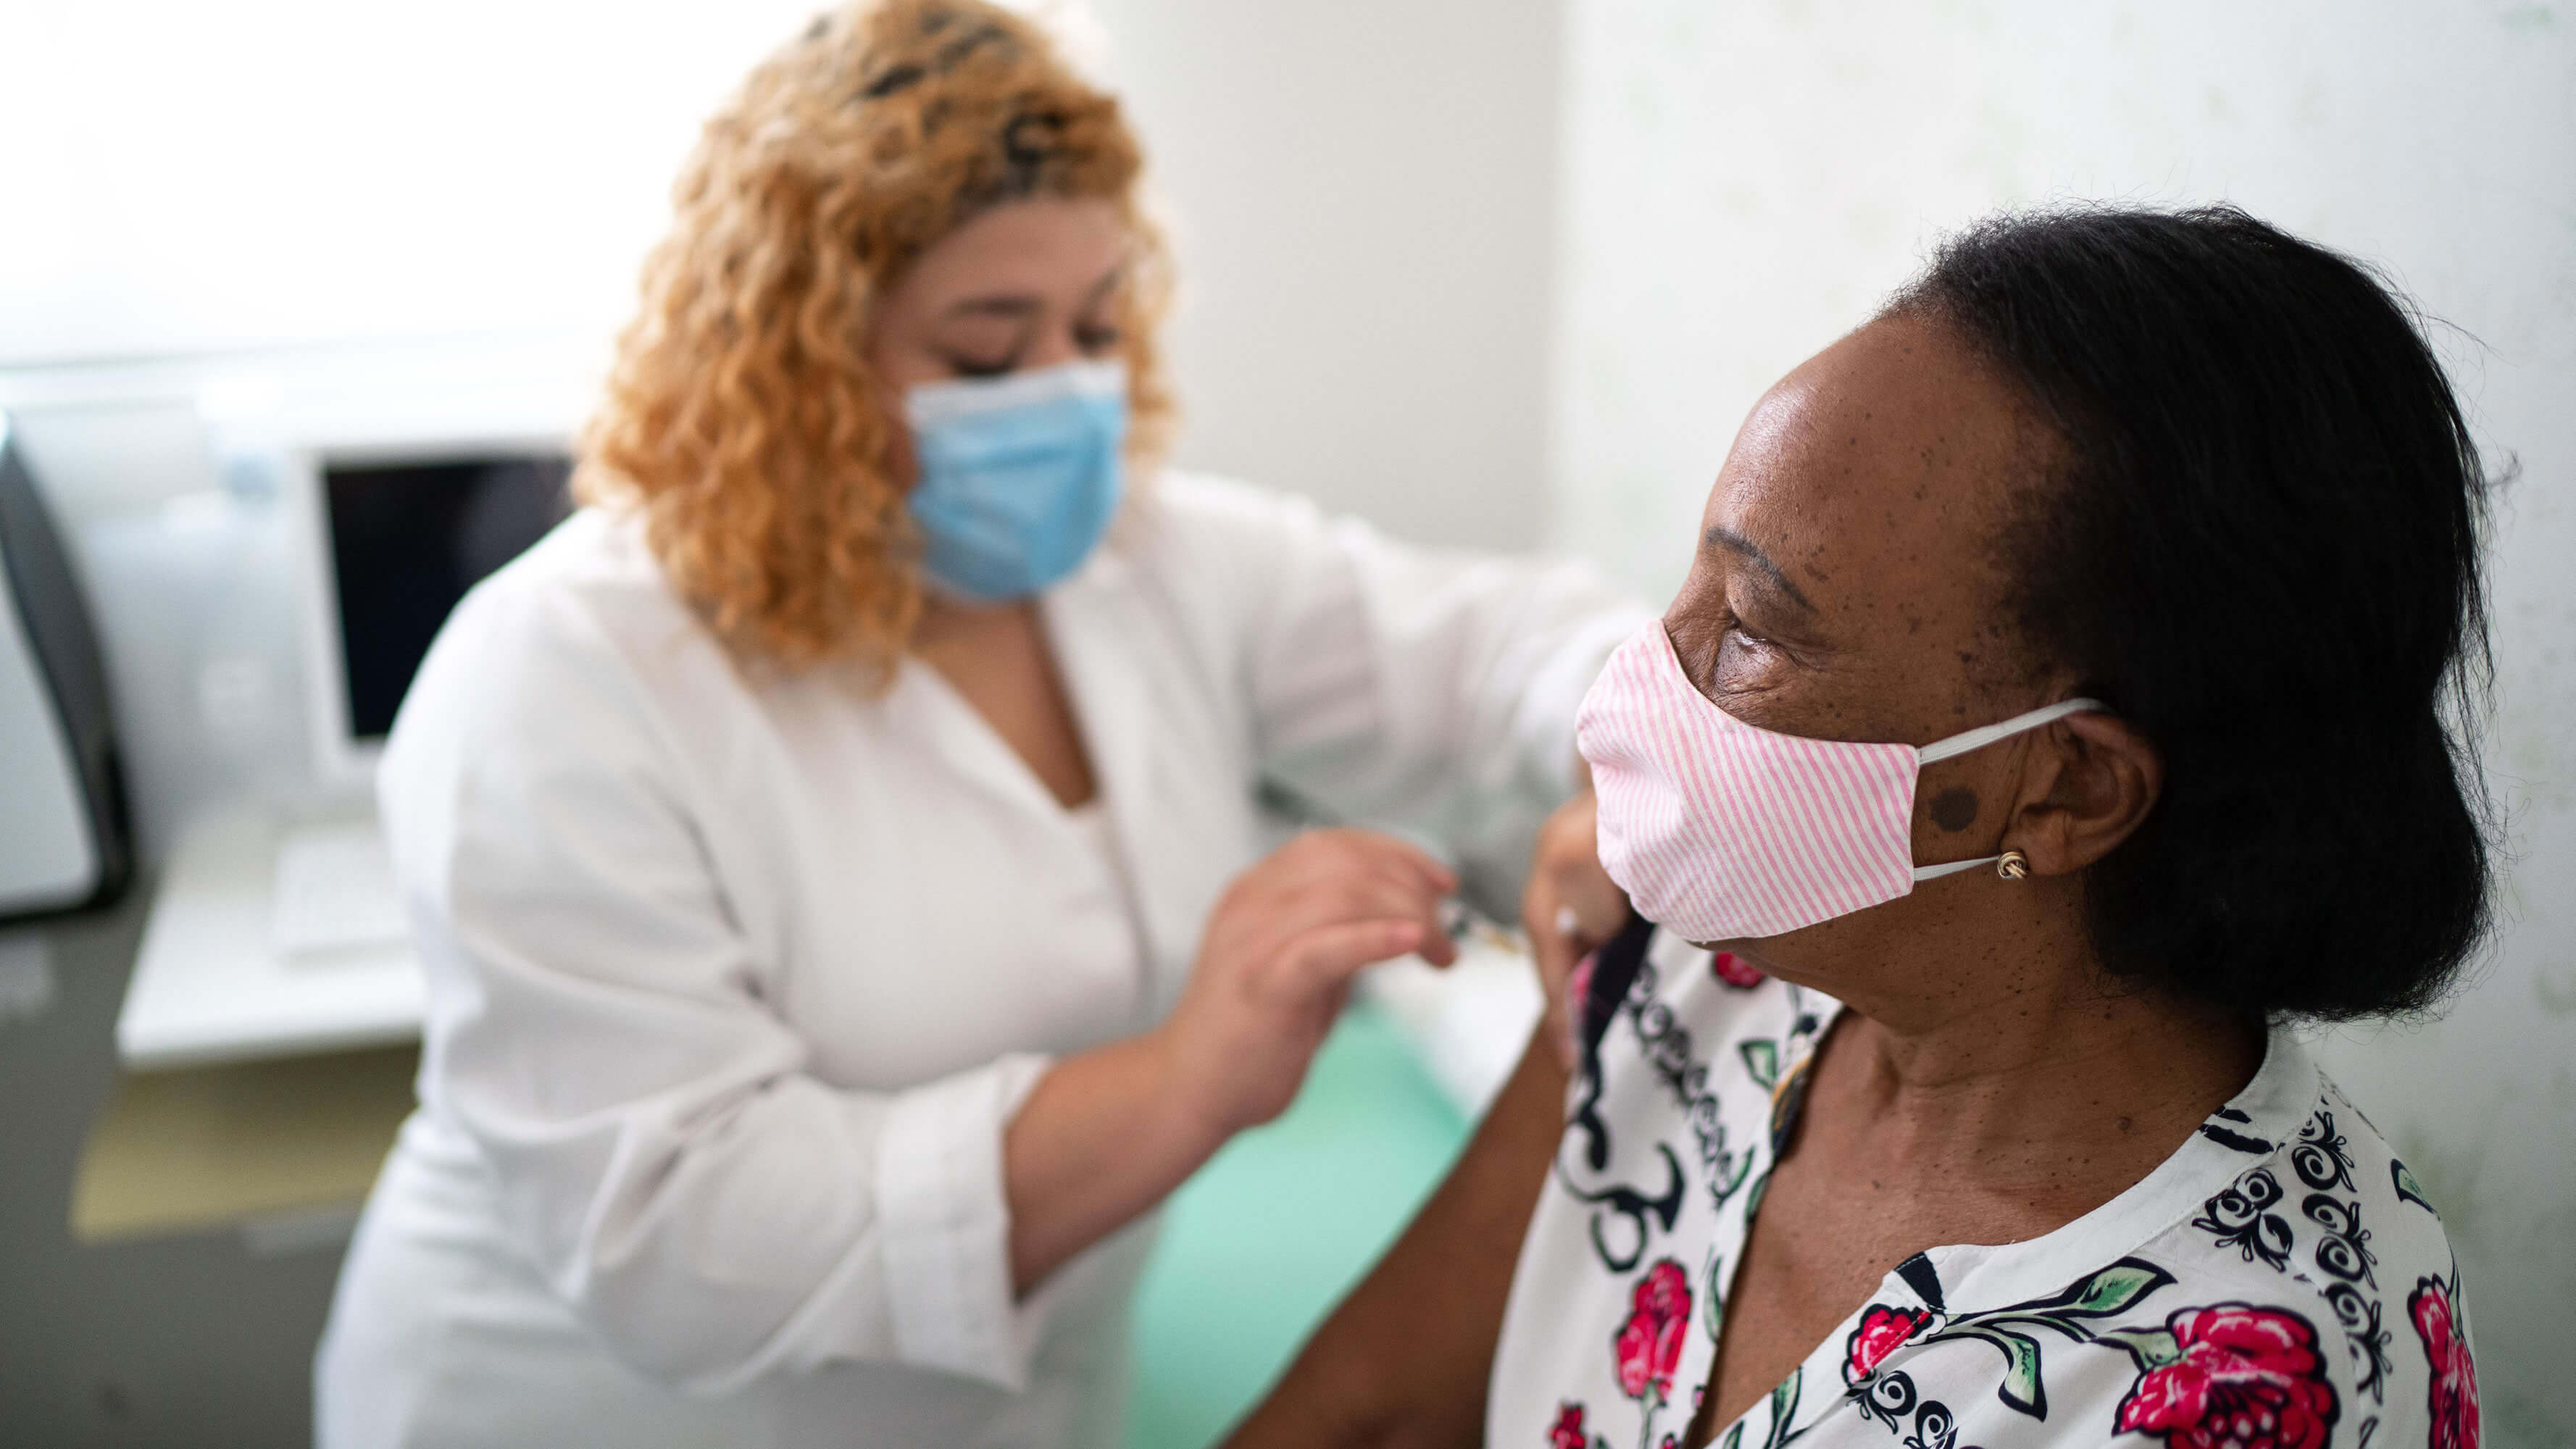 A woman, wearing a face mask, receives a vaccination in an examination room from a nurse practitioner, also wearing a face mask.